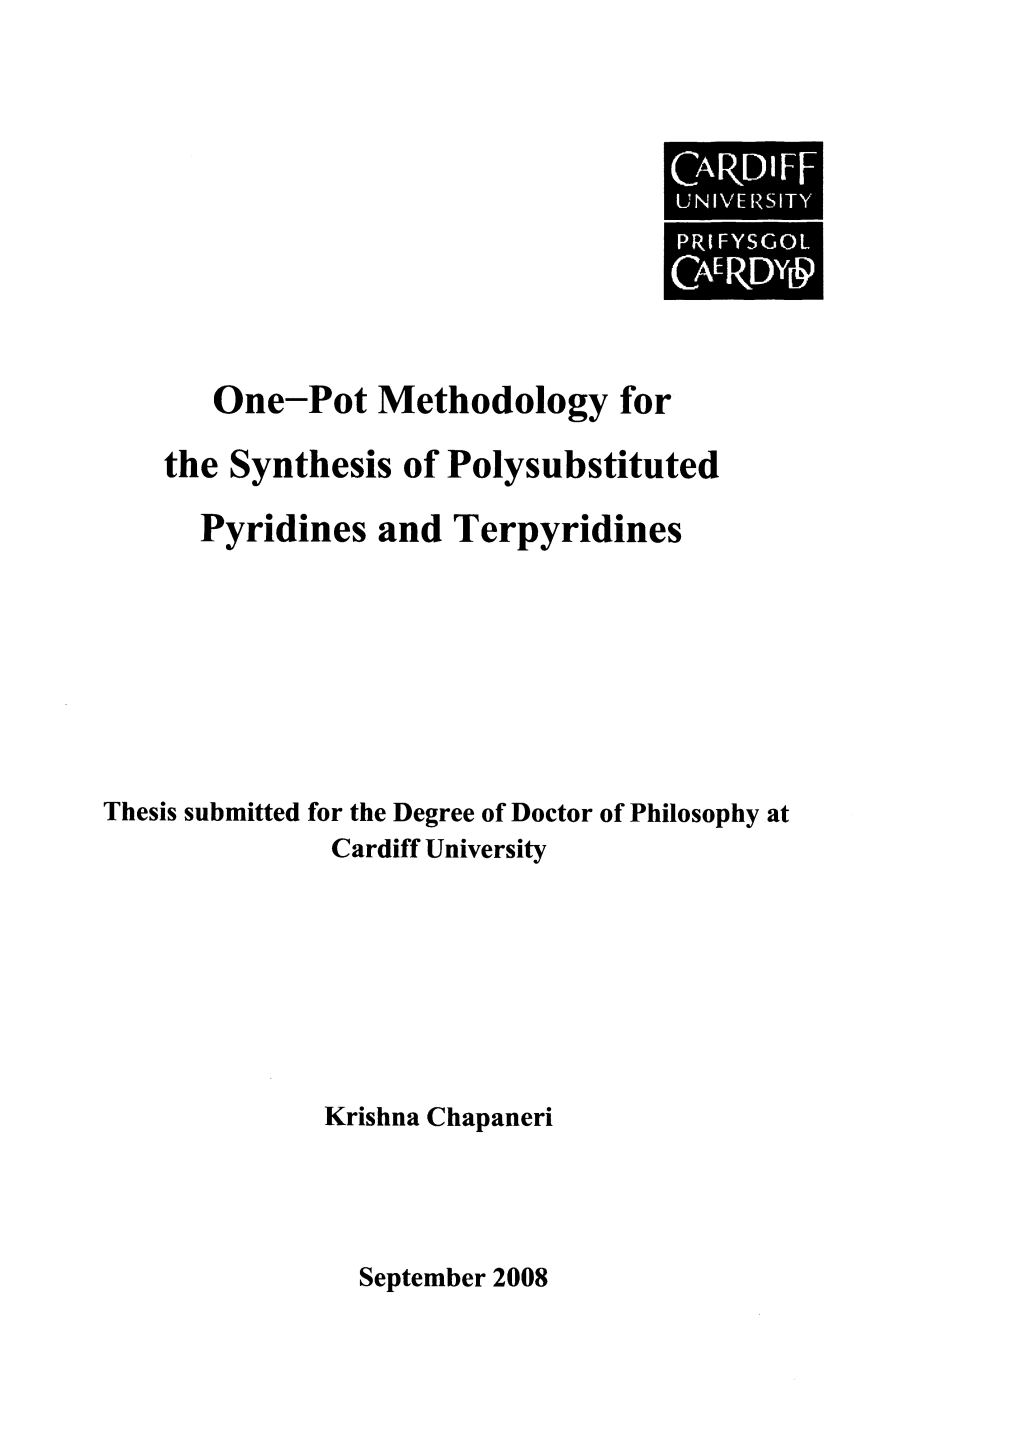 One-Pot Methodology for the Synthesis of Polysubstituted Pyridines and Terpyridines